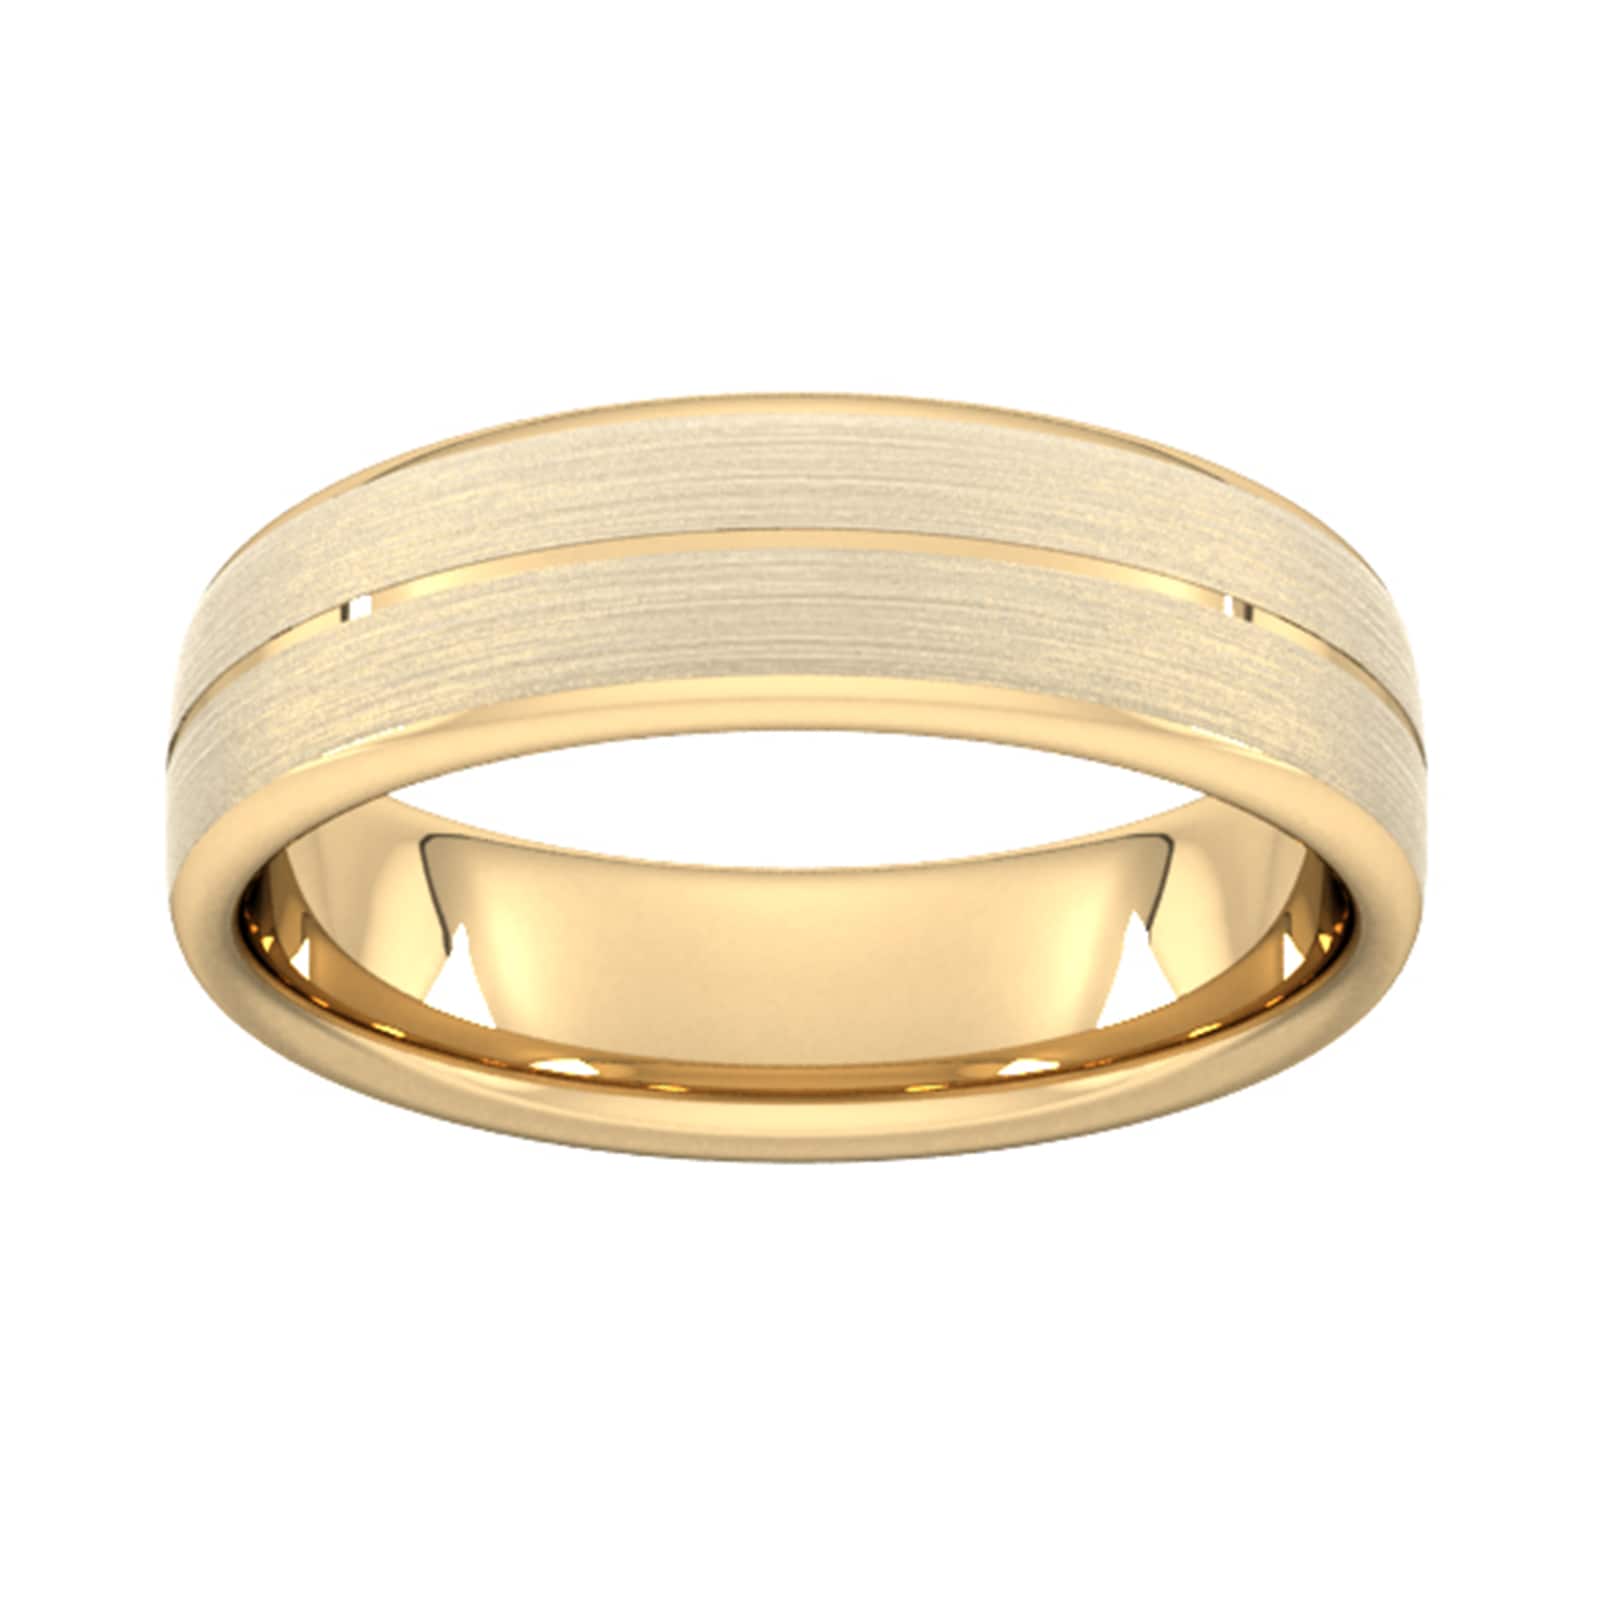 6mm D Shape Standard Centre Groove With Chamfered Edge Wedding Ring In 9 Carat Yellow Gold - Ring Size O